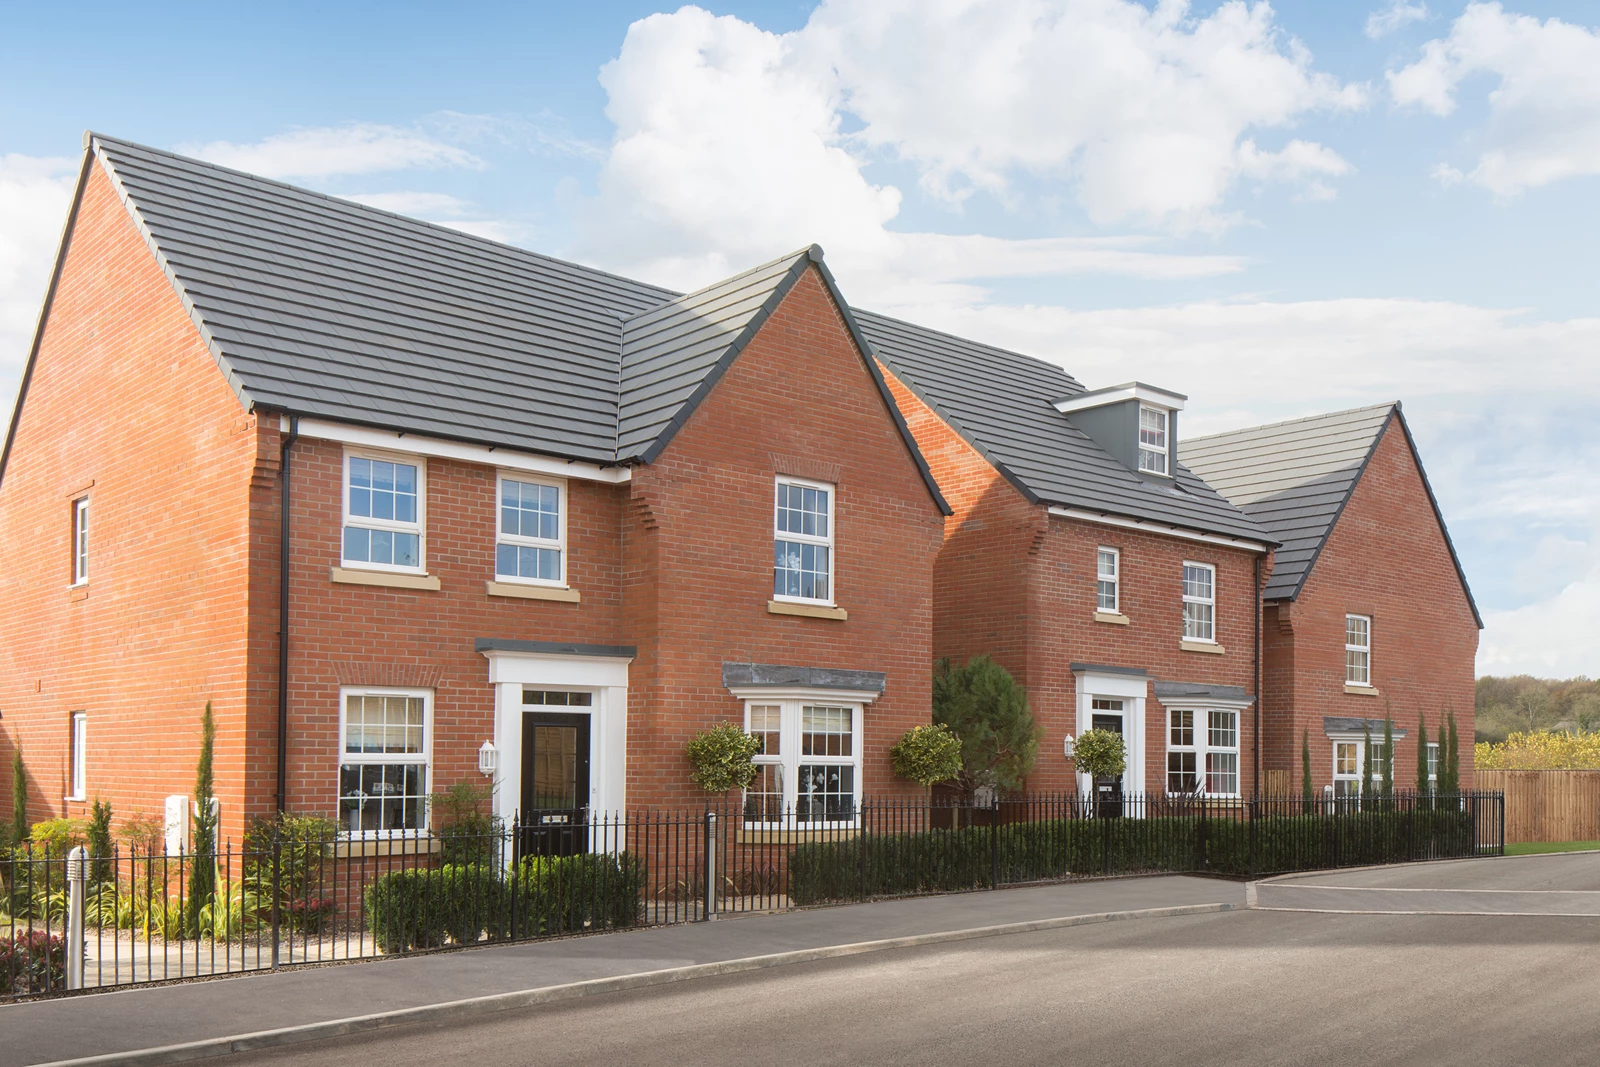 Homes at Thurstan's Rise in Coleford